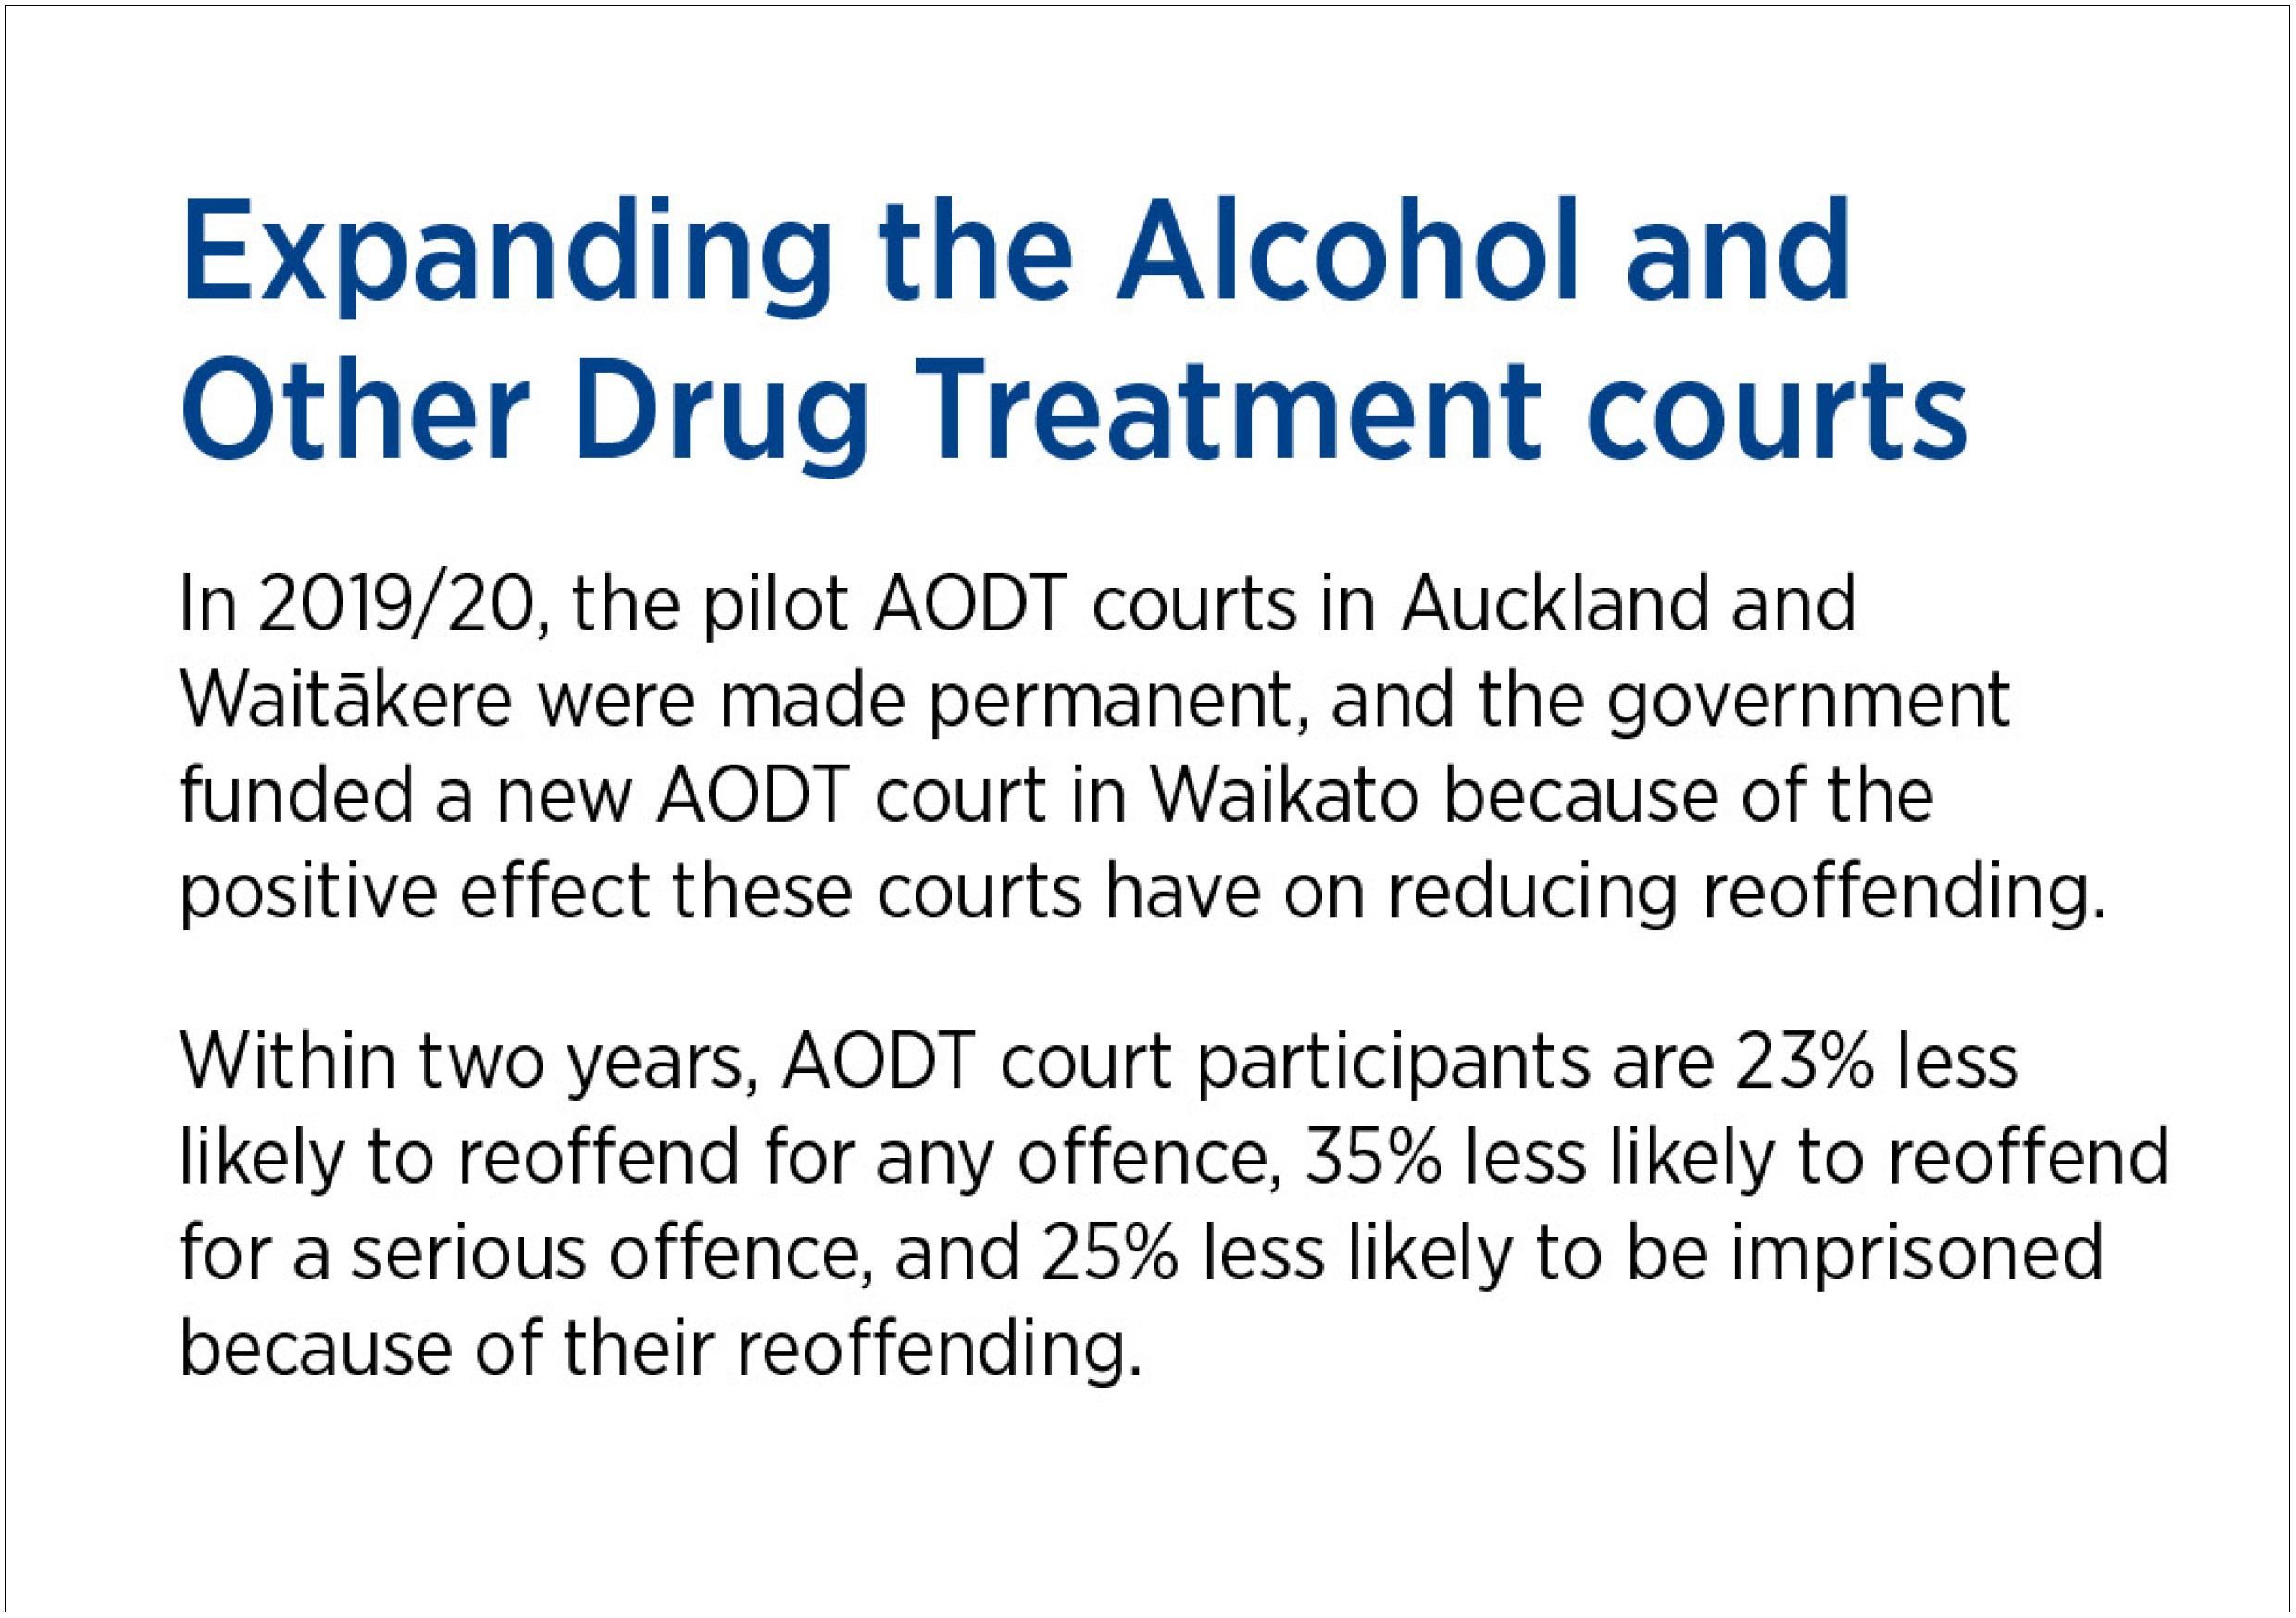 Image from the Ministry of Justice's 2019/20 Annual Report that describes the impact of expanding the alcohol and other drug treatment courts. Within two years, alcohol and other drug treatment court participants are 23 per cent less likely to reoffend for any offence, 35 per cent less likely to reoffend for a serious offence, and 25 per cent less likely to be imprisoned because of their reoffending.